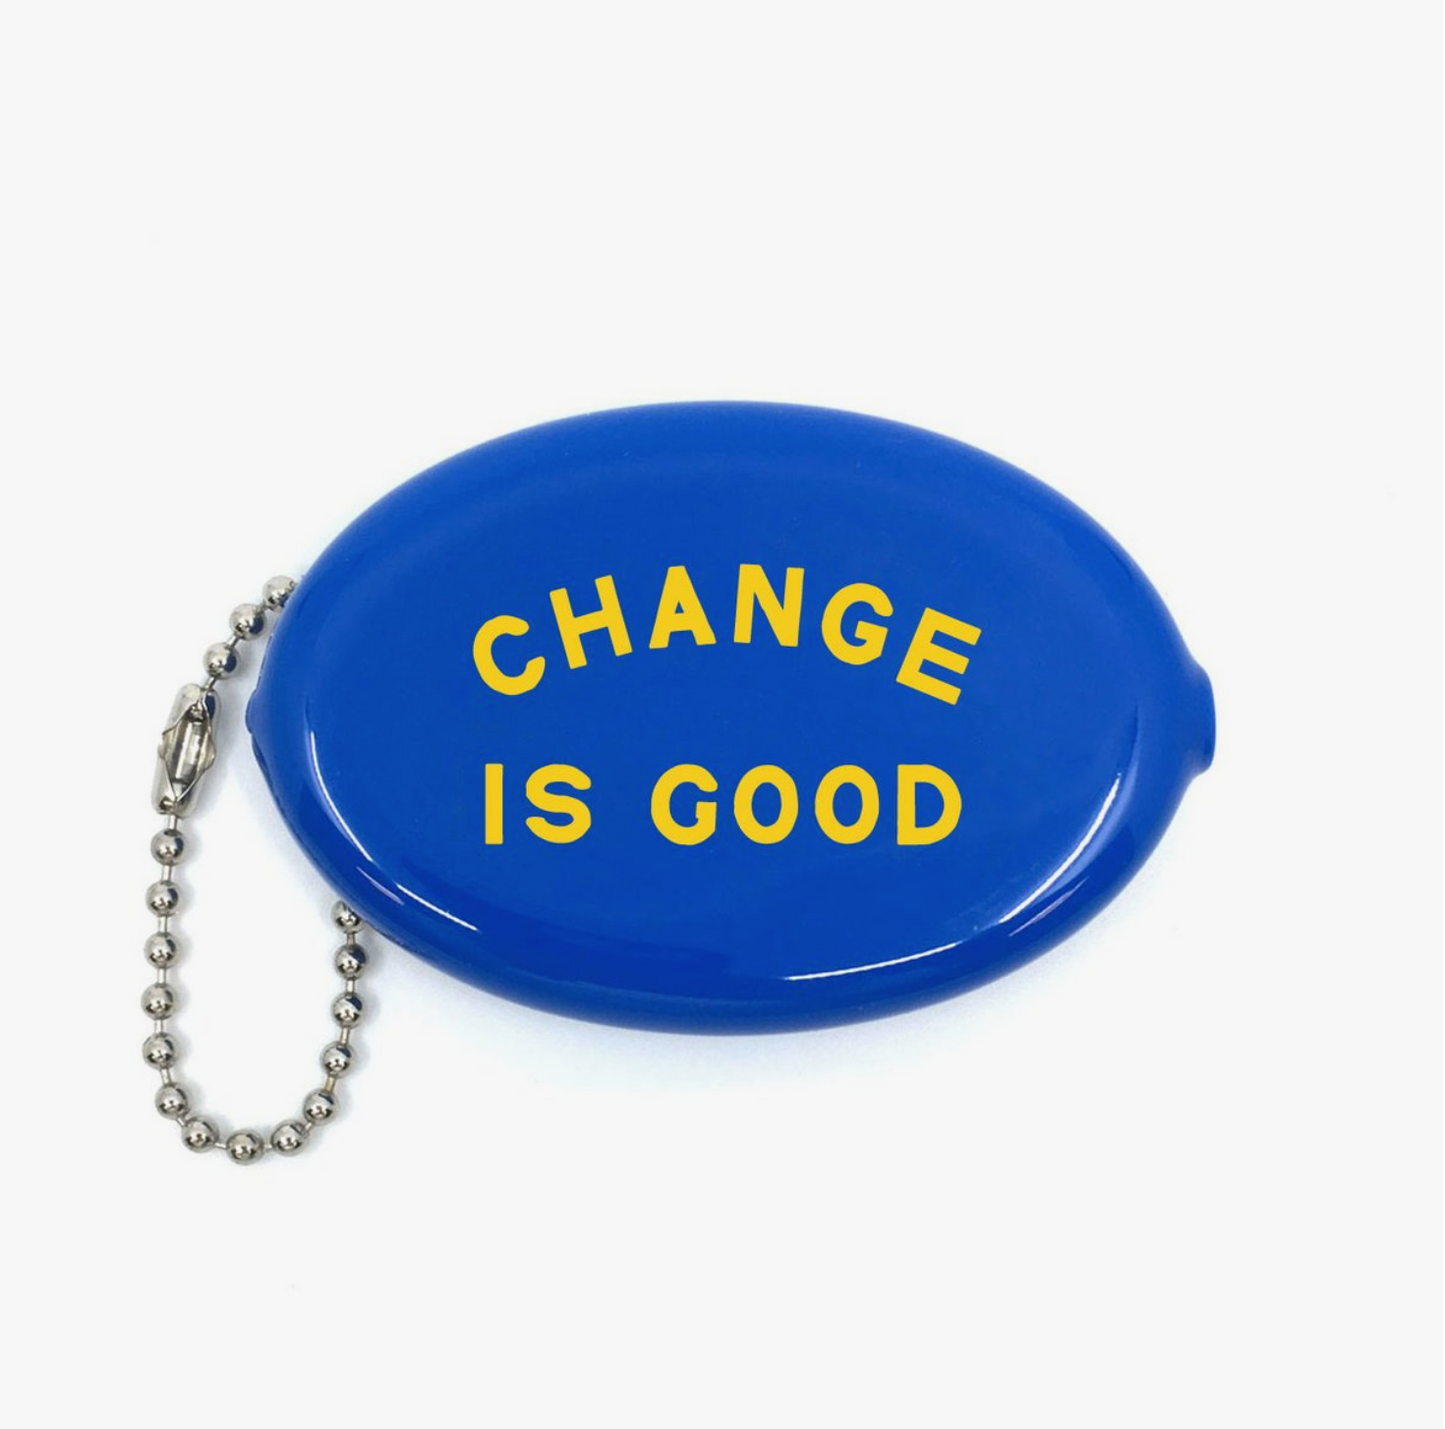 Change is Good Retro Coin Pouch